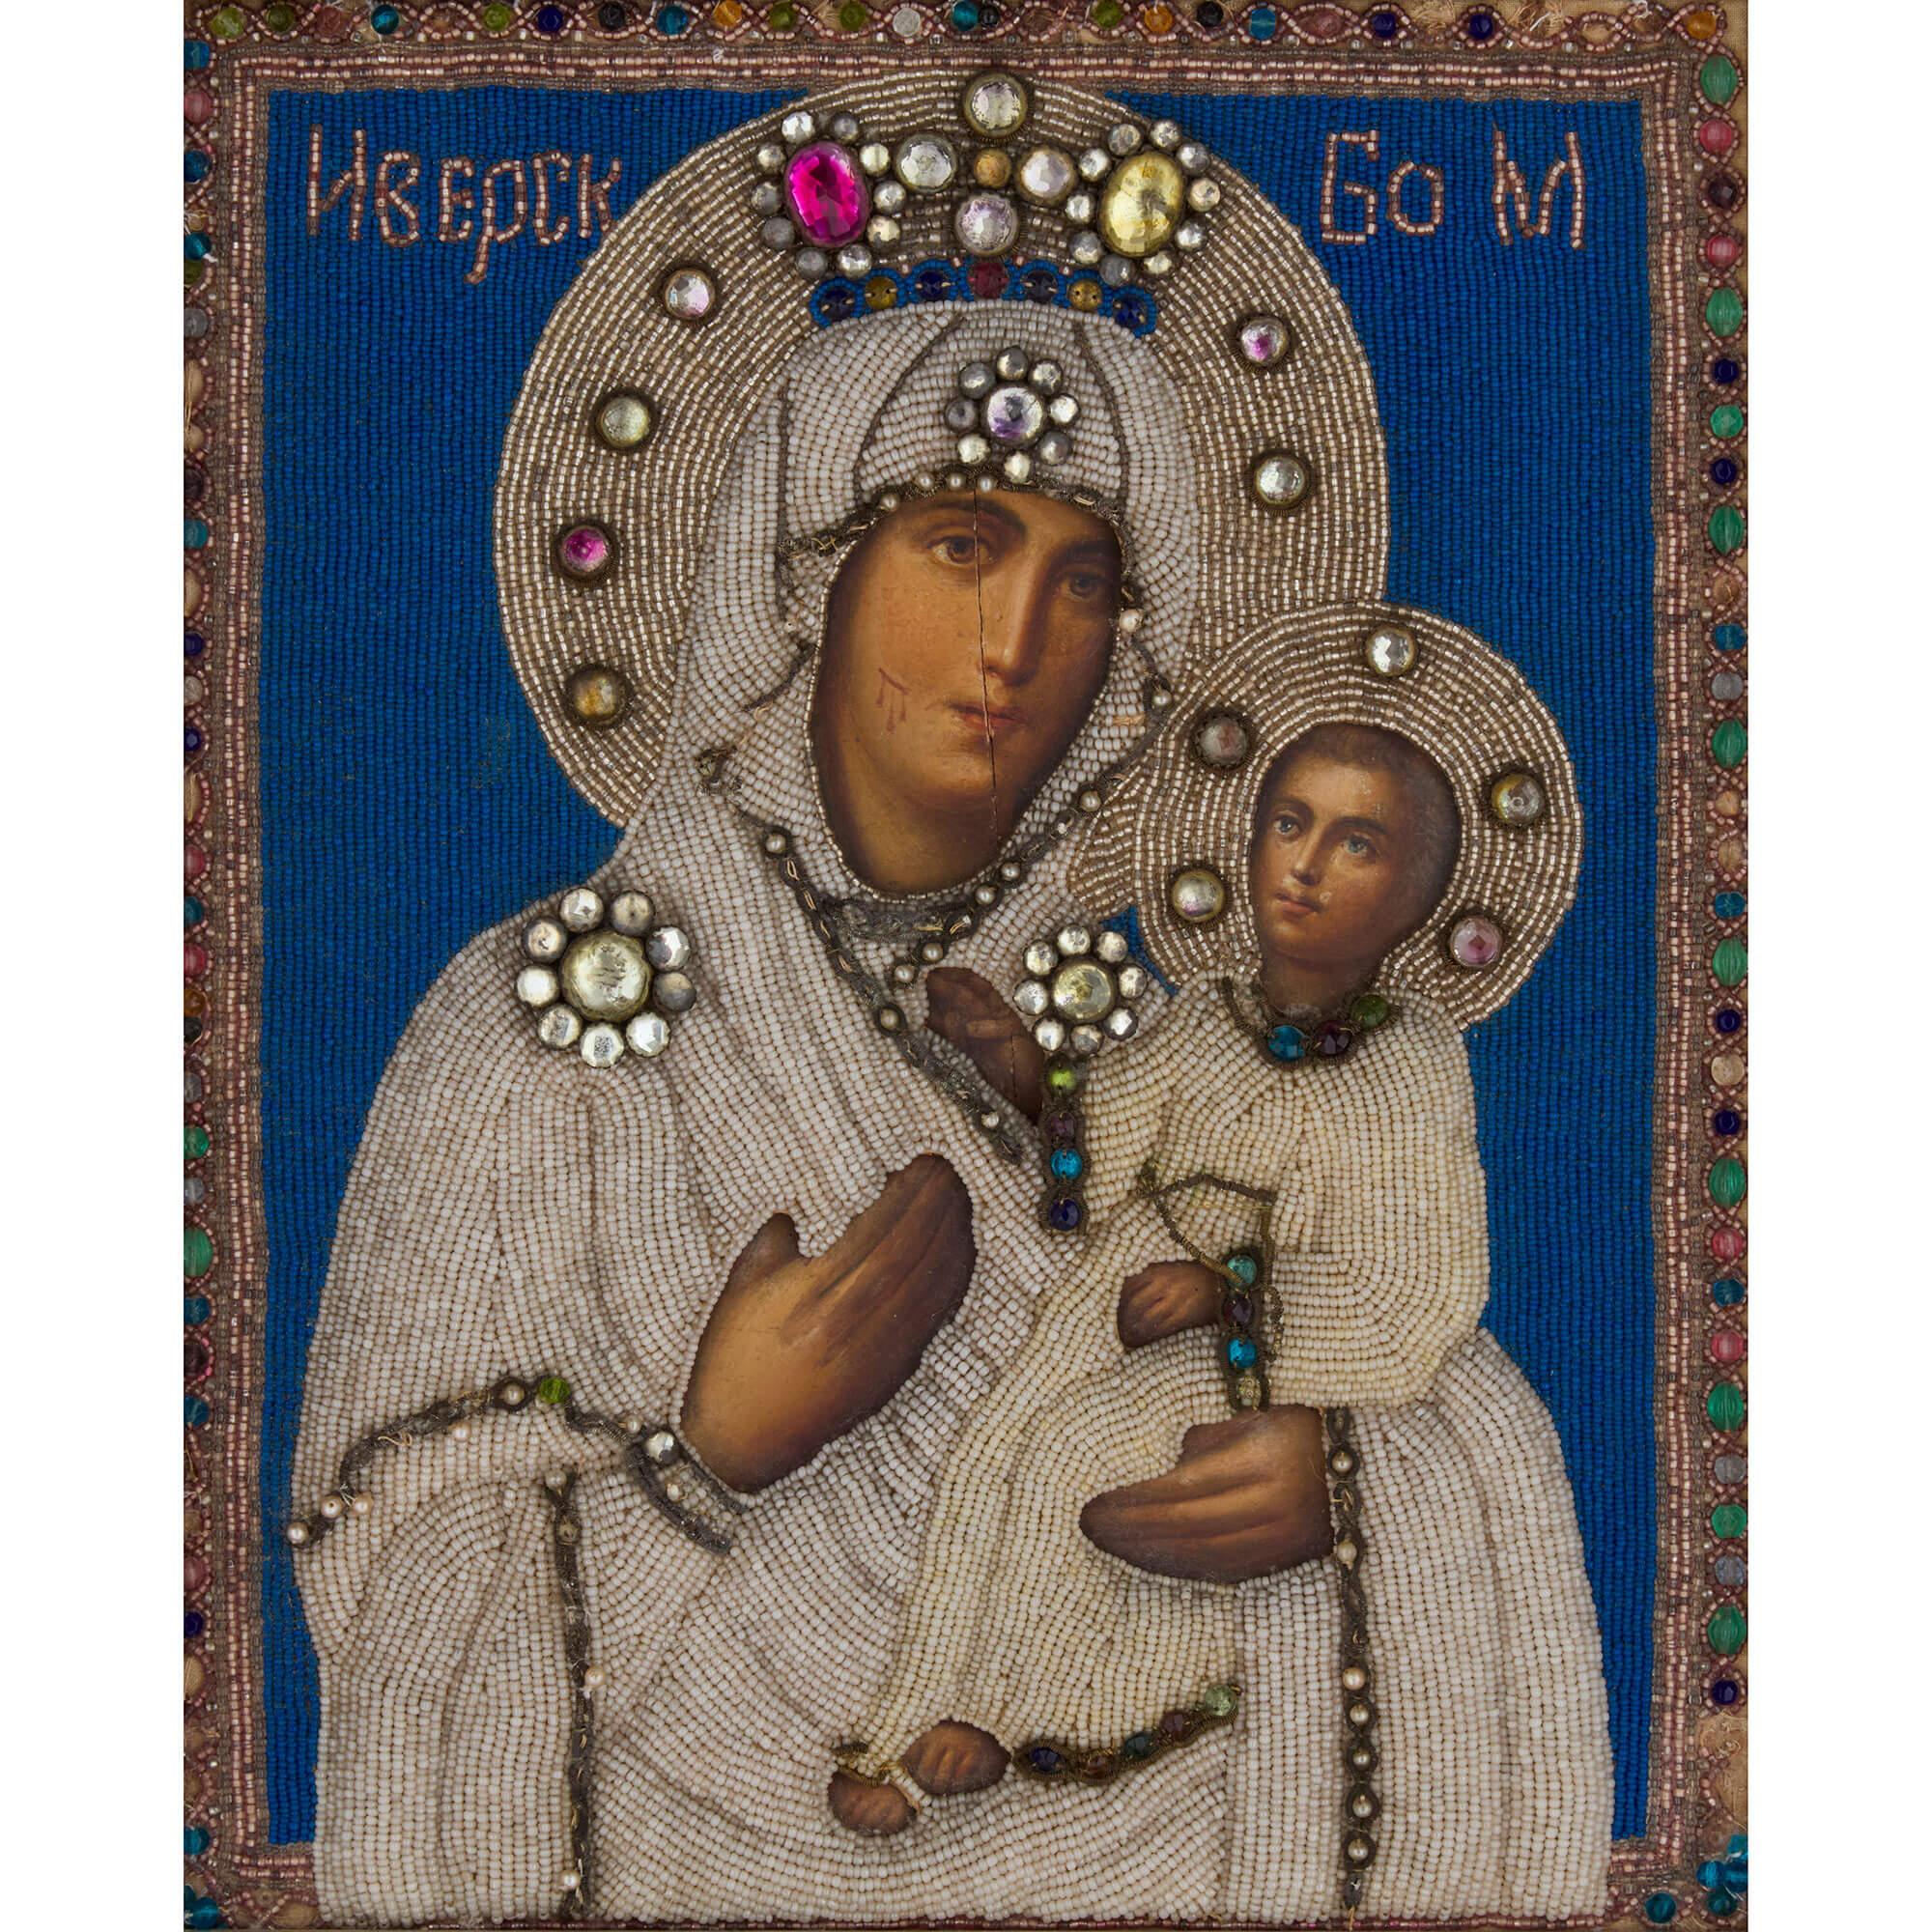 Antique Russian beaded icon after the Iverskaya
Russian, Early 20th Century
Icon: Height 34cm, width 27cm, depth 2cm
Frame: Height 48.5cm, width 42cm, depth 5.5cm

This unusual beaded religious icon is designed after the ‘Iverskaya’ (Russian) also